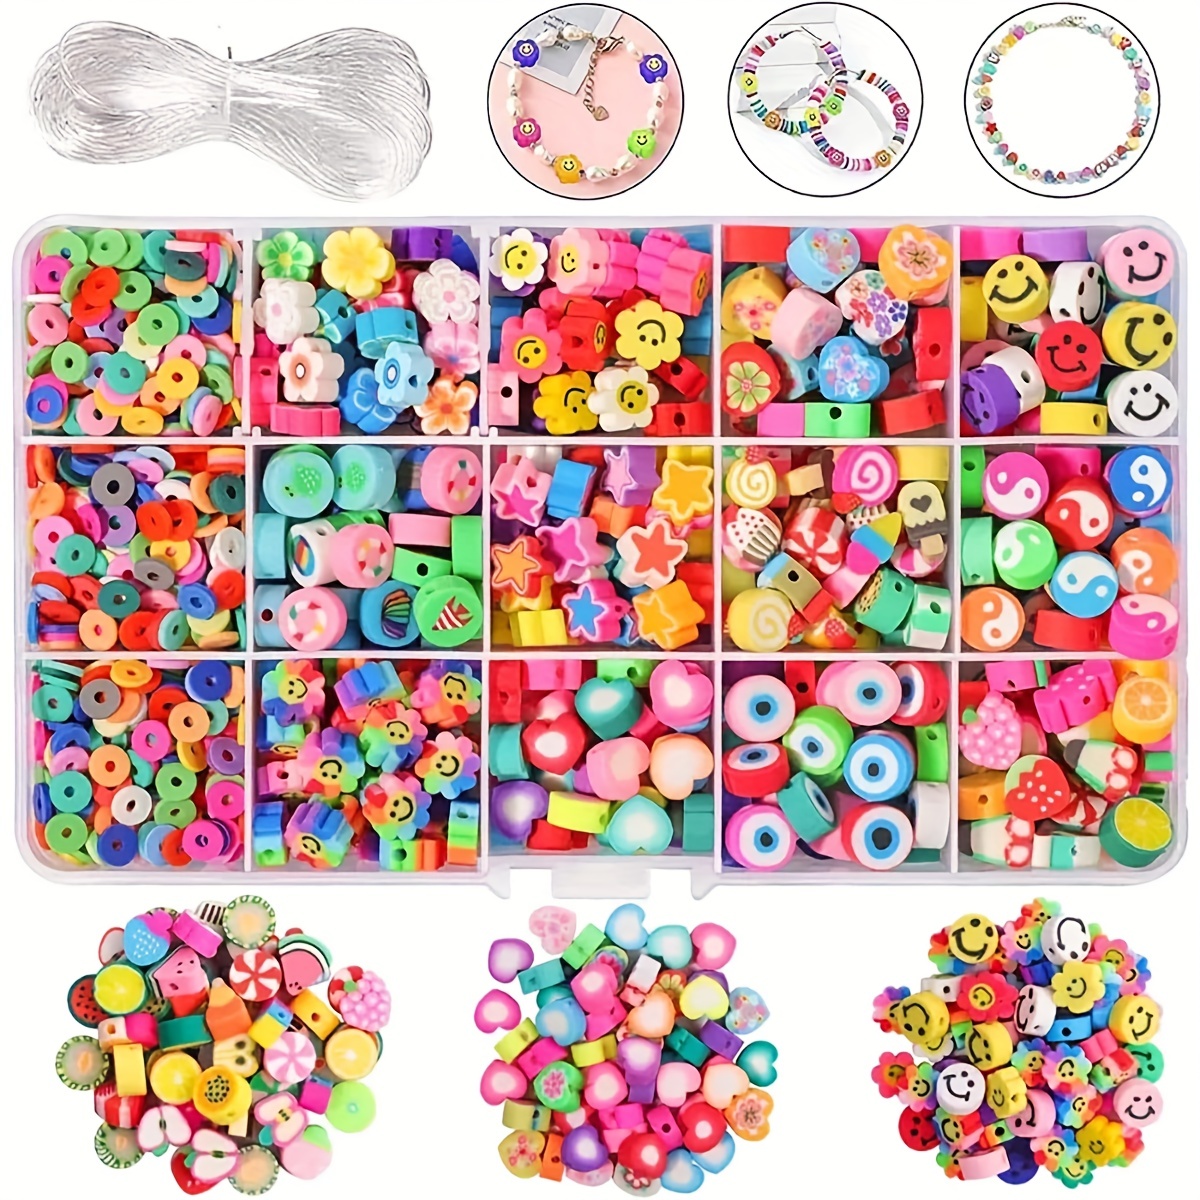 5300pcs Clay Bead Bracelet Making Kit, Preppy Spacer Flat Beads For Jewelry  Making, Polymer Black Stone Beads With Charms And Bungee Cord For Girls  Gifts Girls Crafts